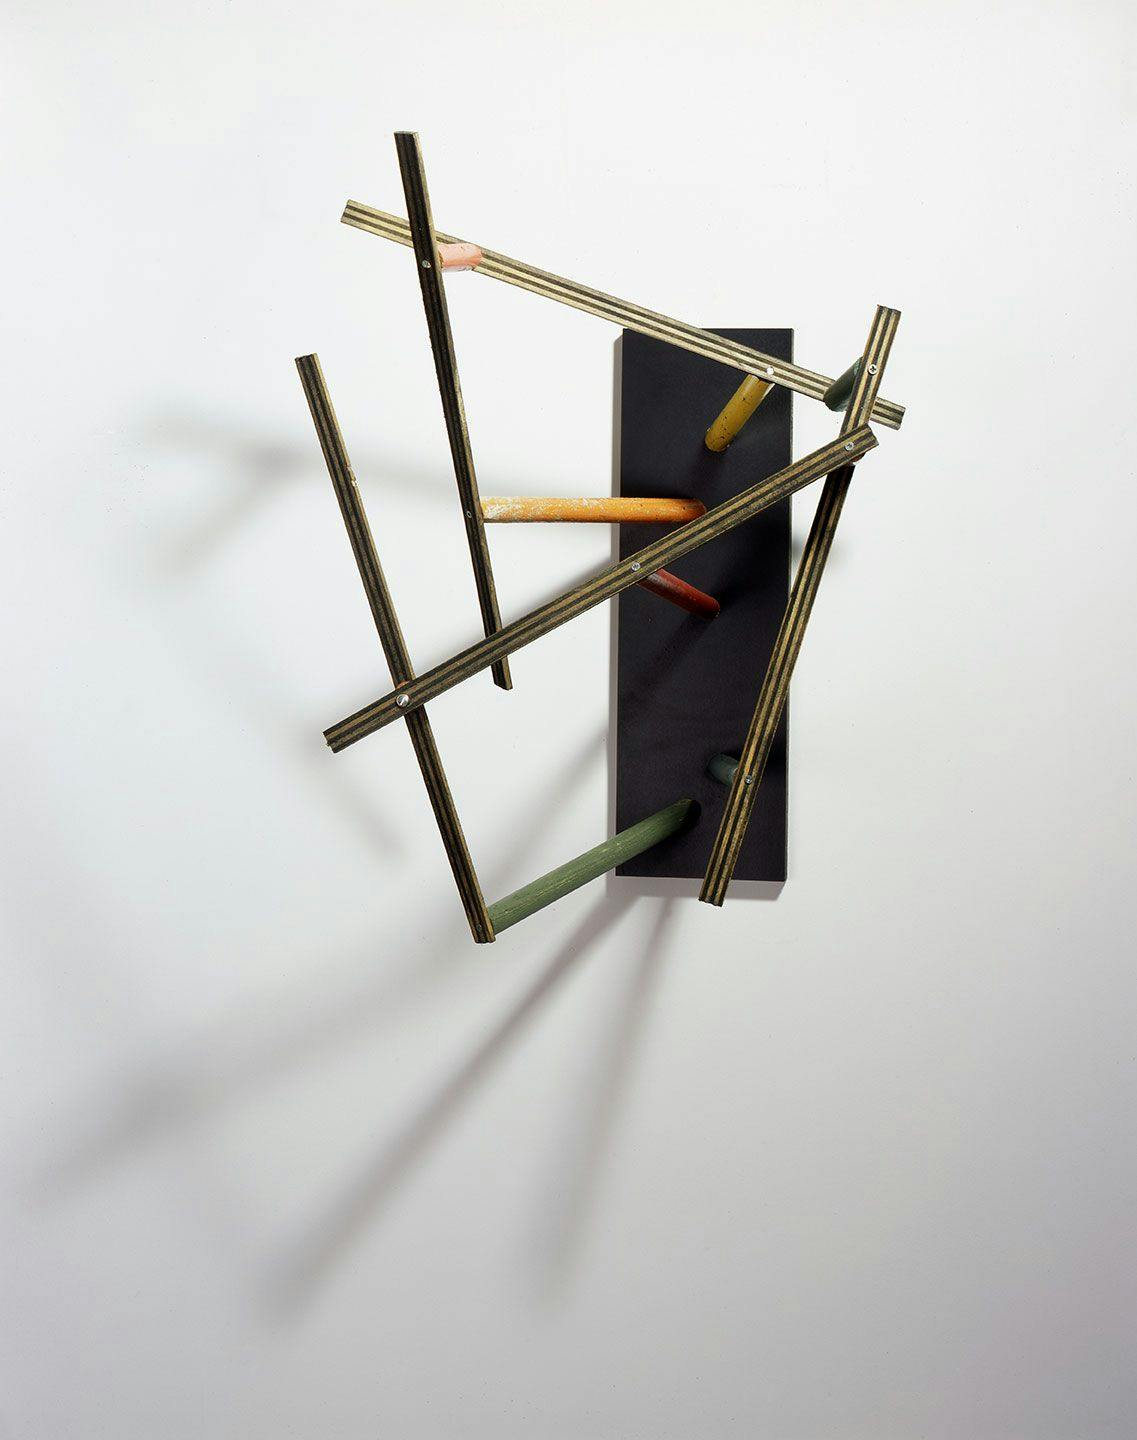 A mixed media, wall-mounted sculpture by Al Taylor, titled Untitled: (Latin Studies), dated 1985.